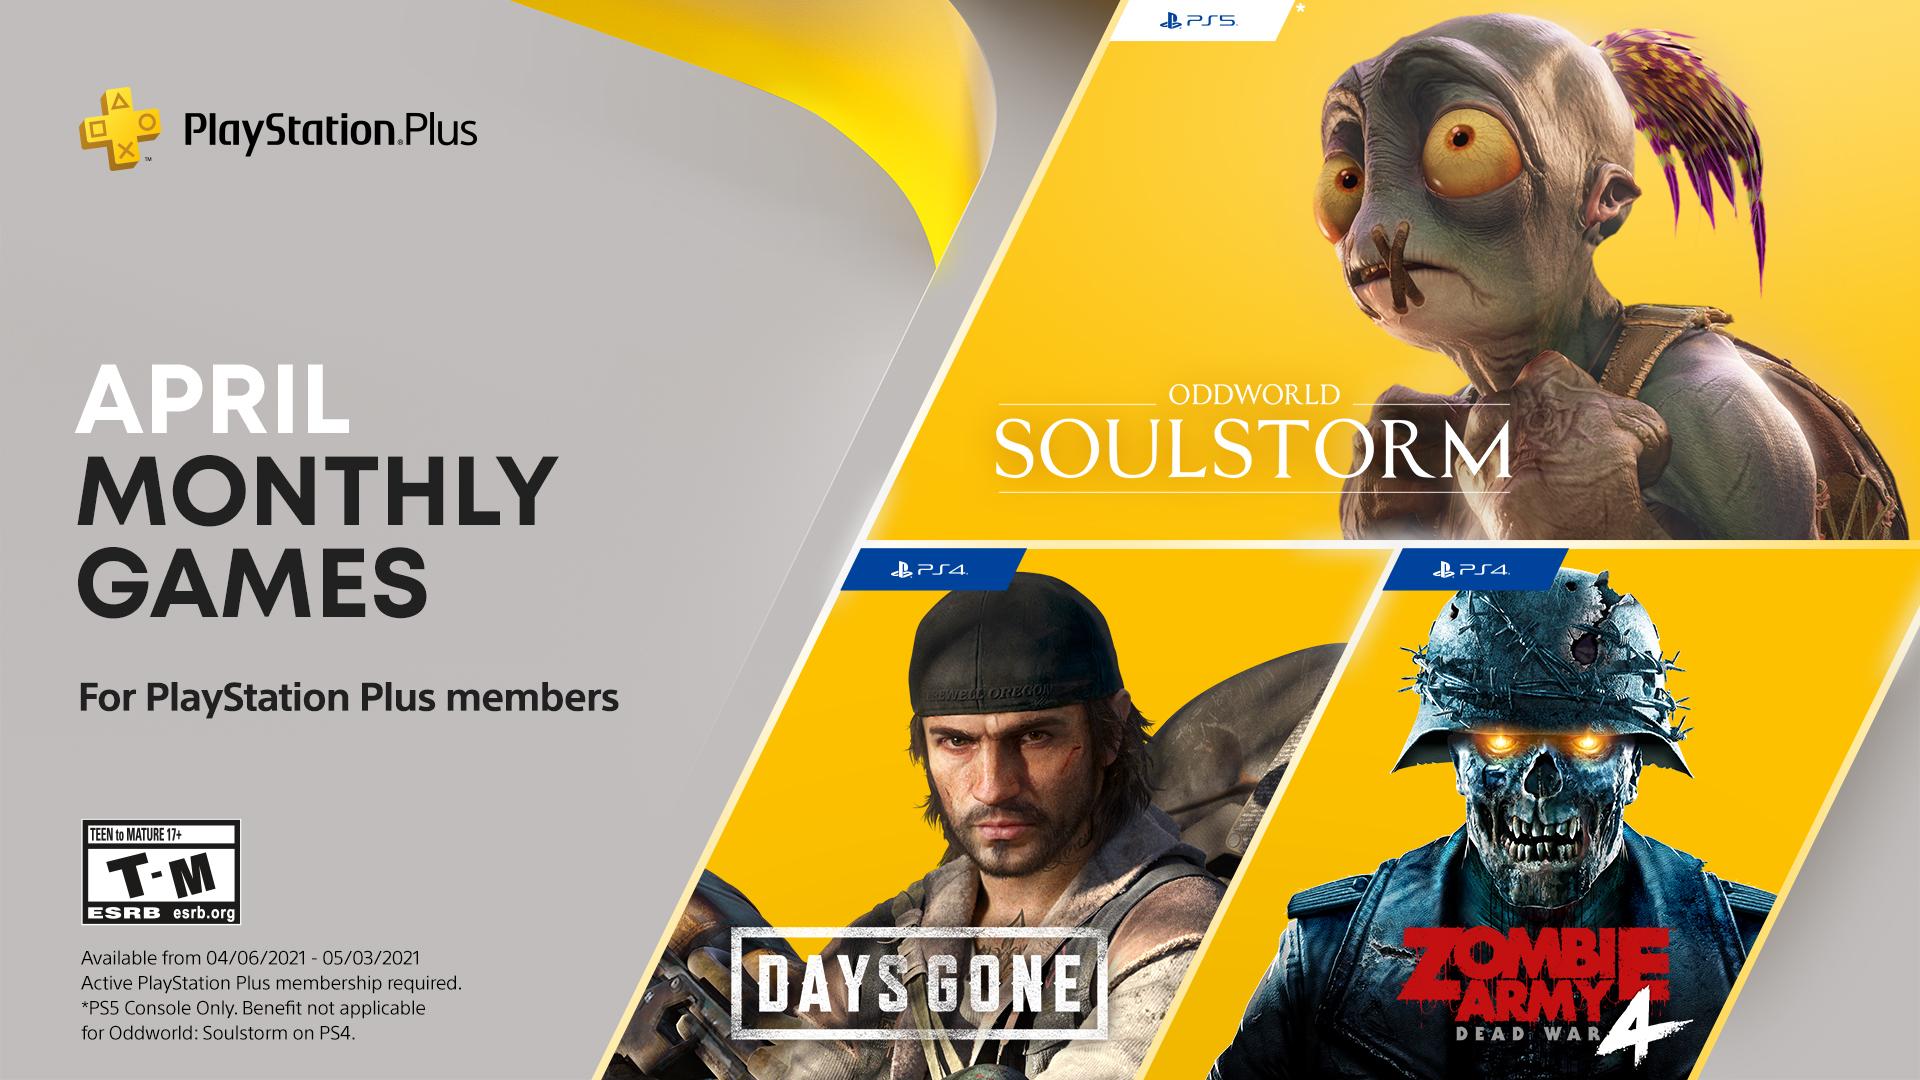 PlayStation Plus free games for April 2021 announced